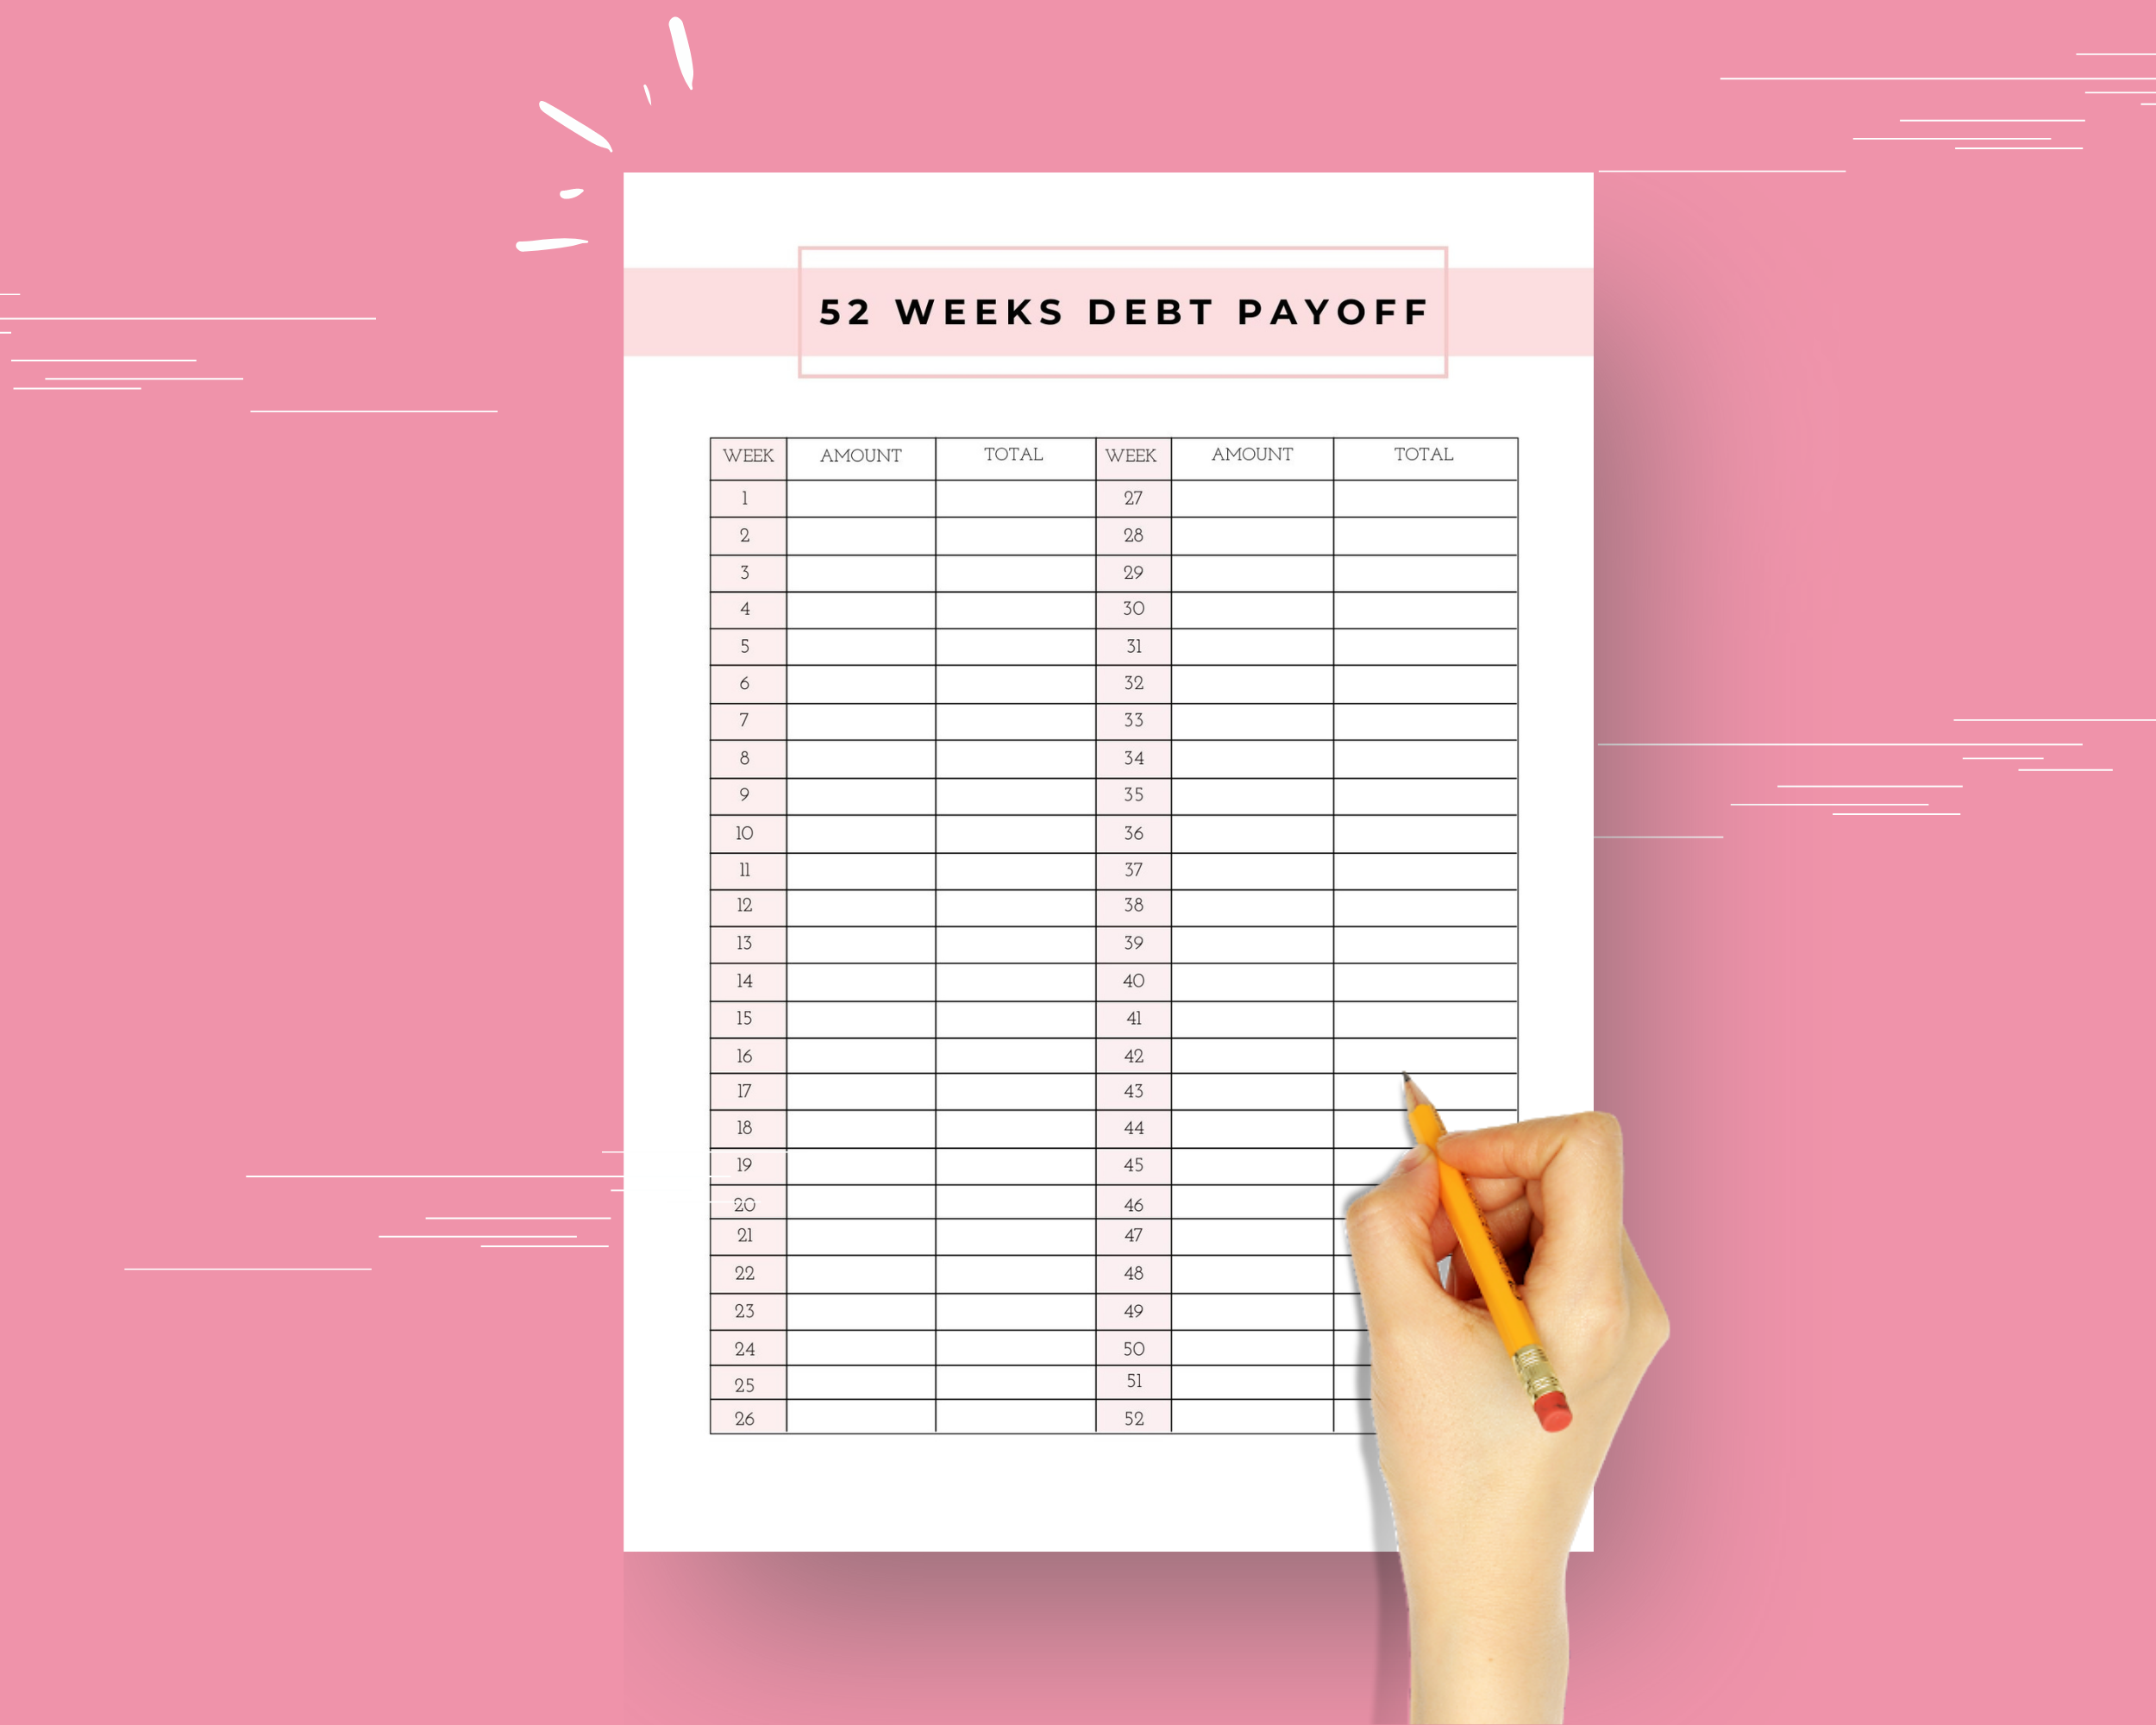 Debt Tracker Canva Templates | Commercial Use | Editable Debt Chart | 52 Weeks Debt Payoff